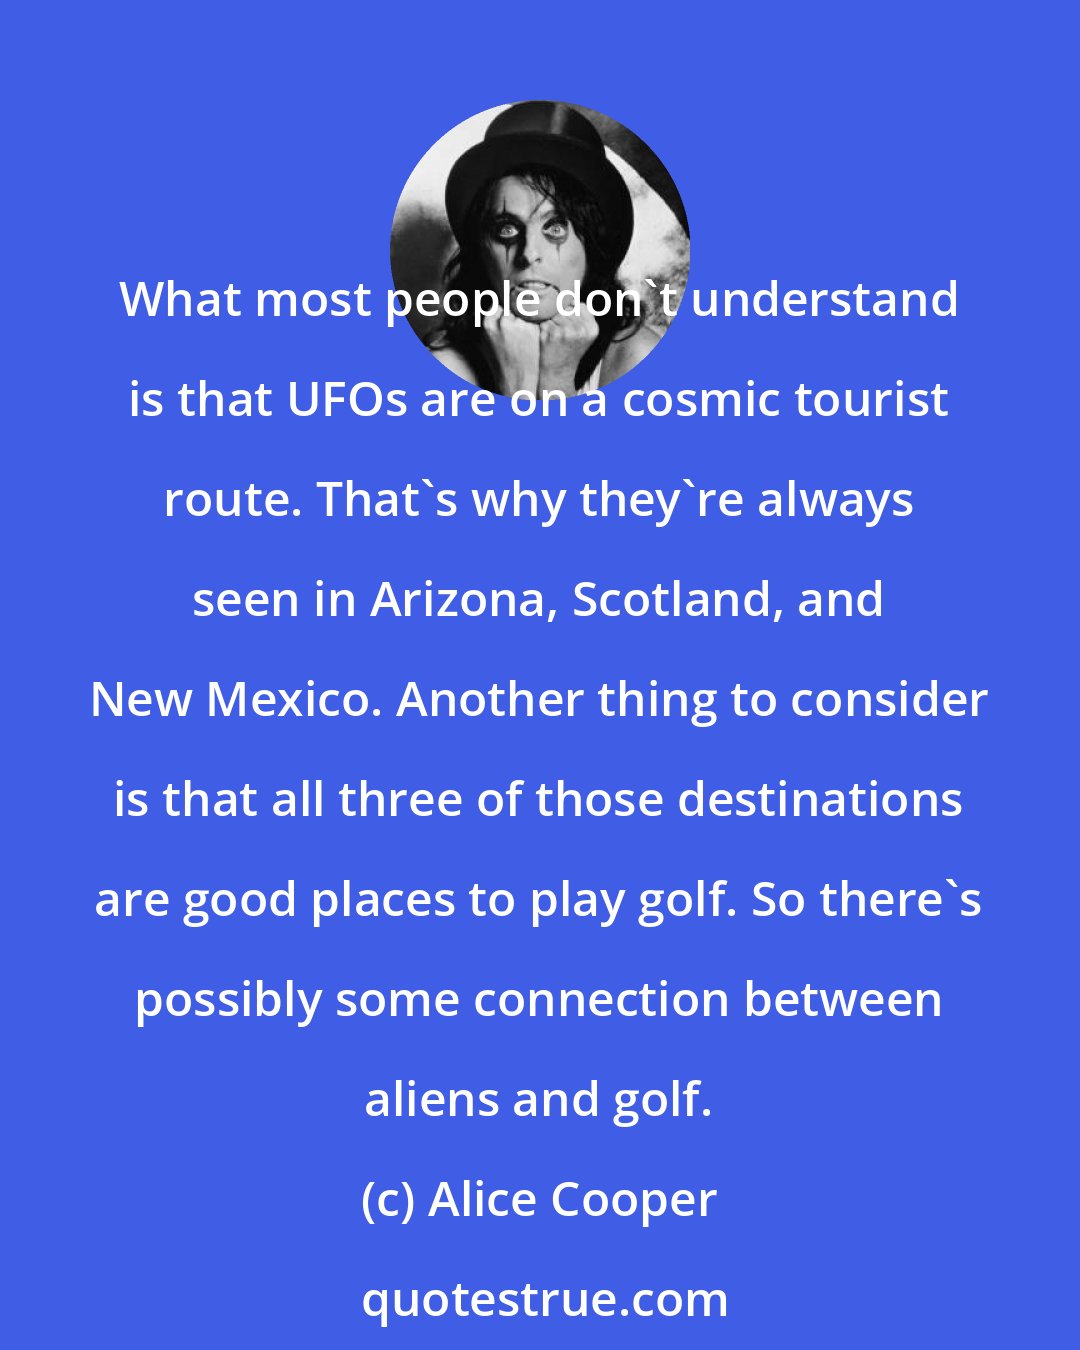 Alice Cooper: What most people don't understand is that UFOs are on a cosmic tourist route. That's why they're always seen in Arizona, Scotland, and New Mexico. Another thing to consider is that all three of those destinations are good places to play golf. So there's possibly some connection between aliens and golf.